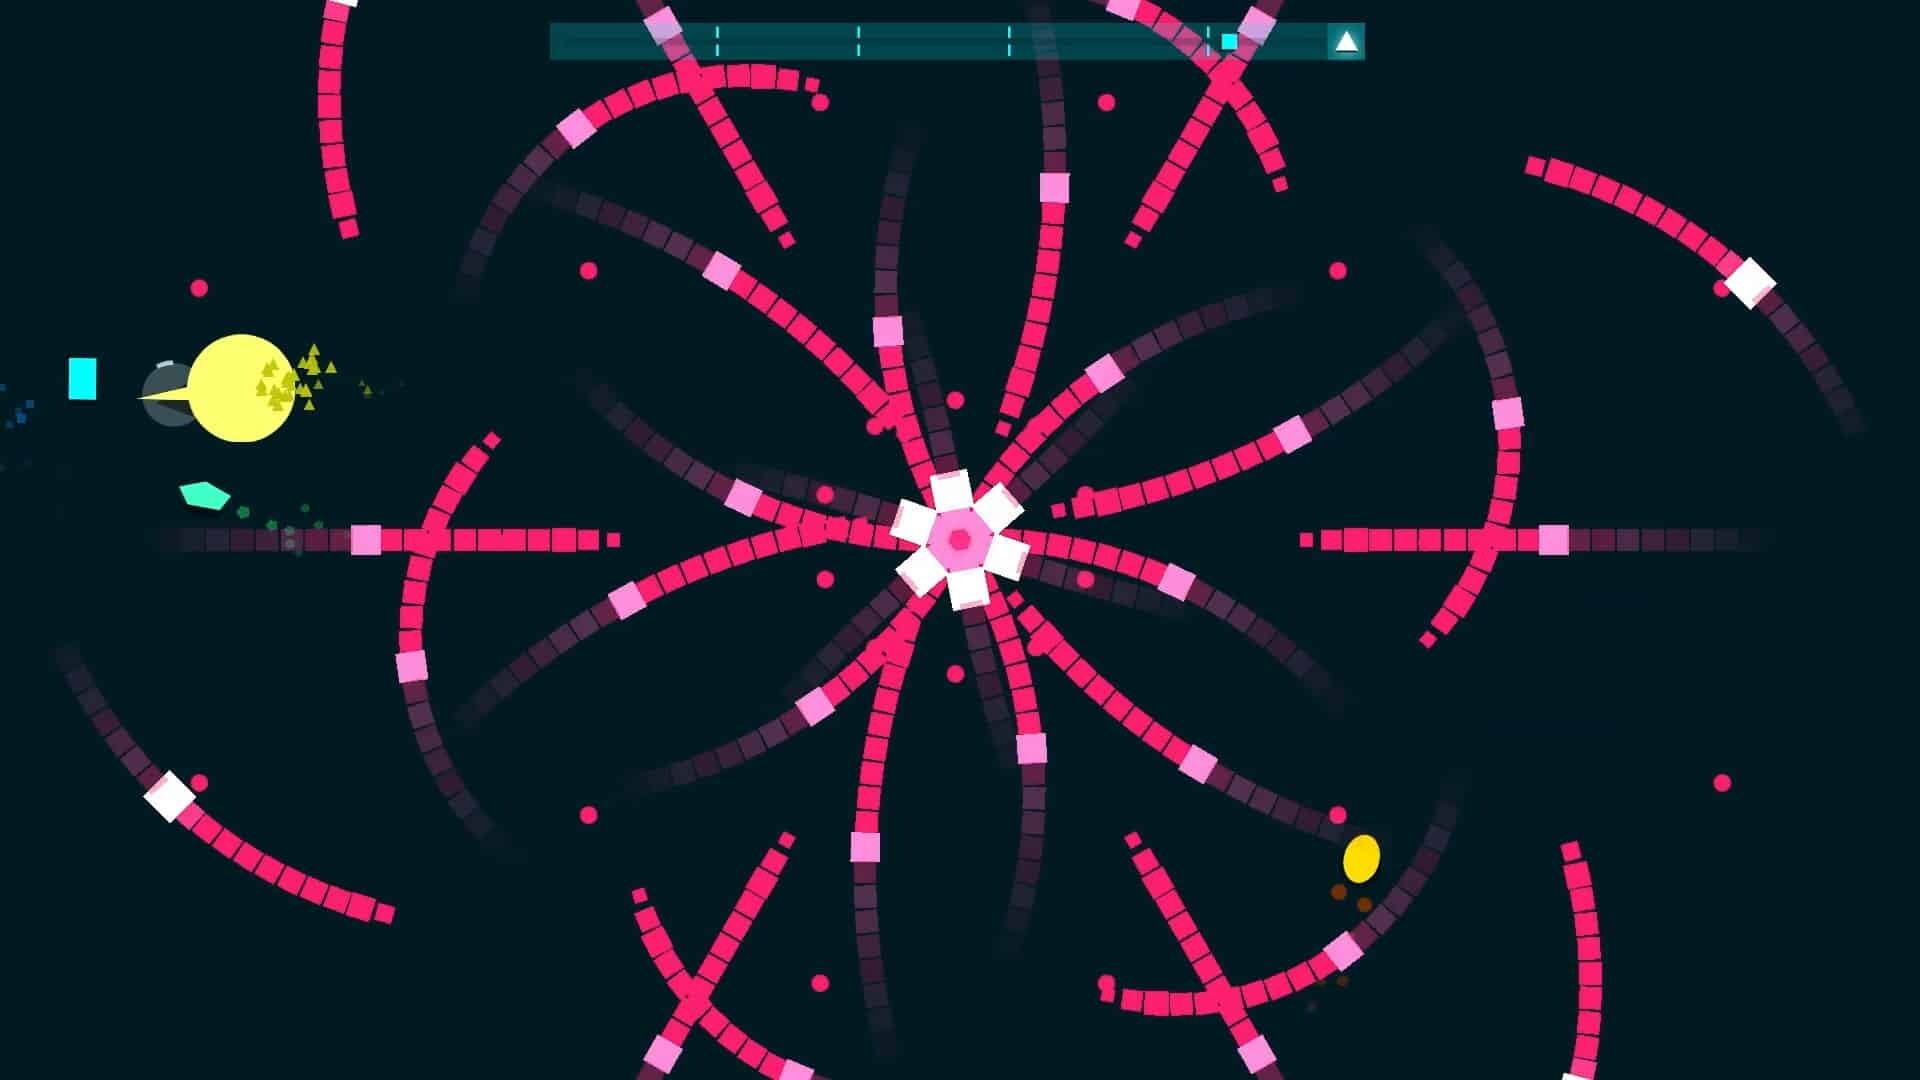 Just Shapes and Beats game screenshot courtesy Steam